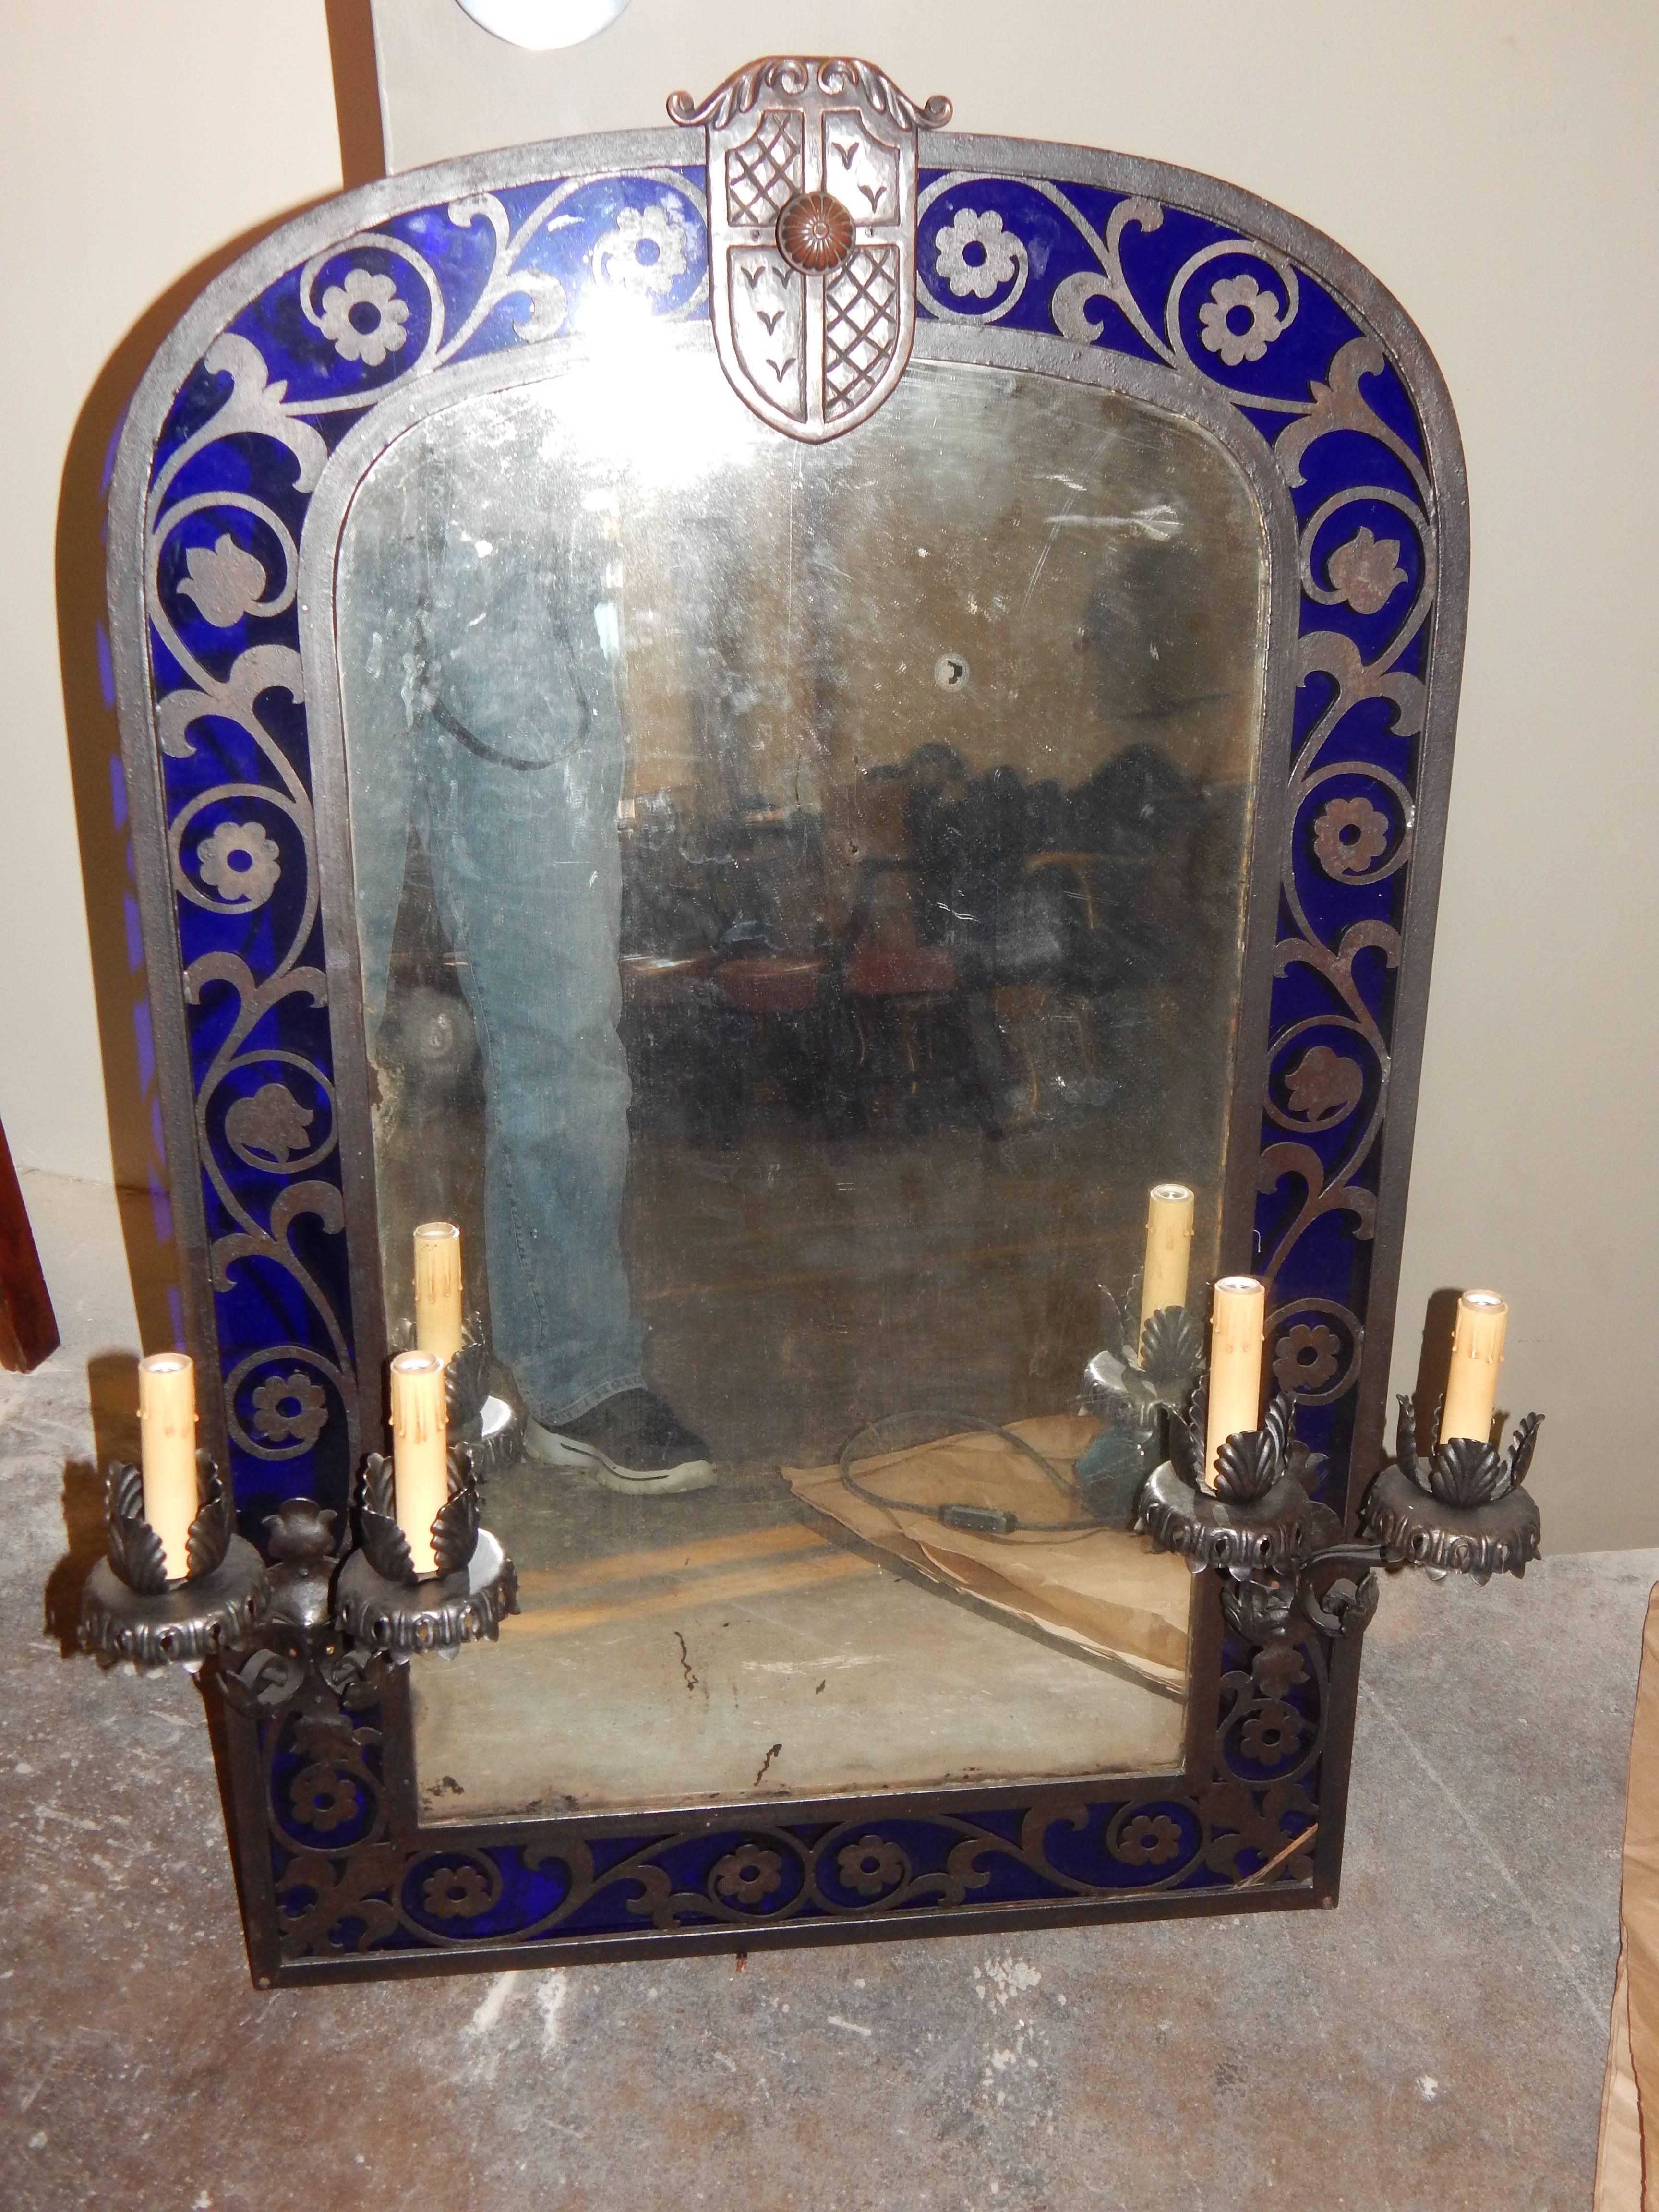 A striking and unusual pair of Renaissance style patinated metal mirrors, with sconces, surrounded by vibrant cobalt blue glass.